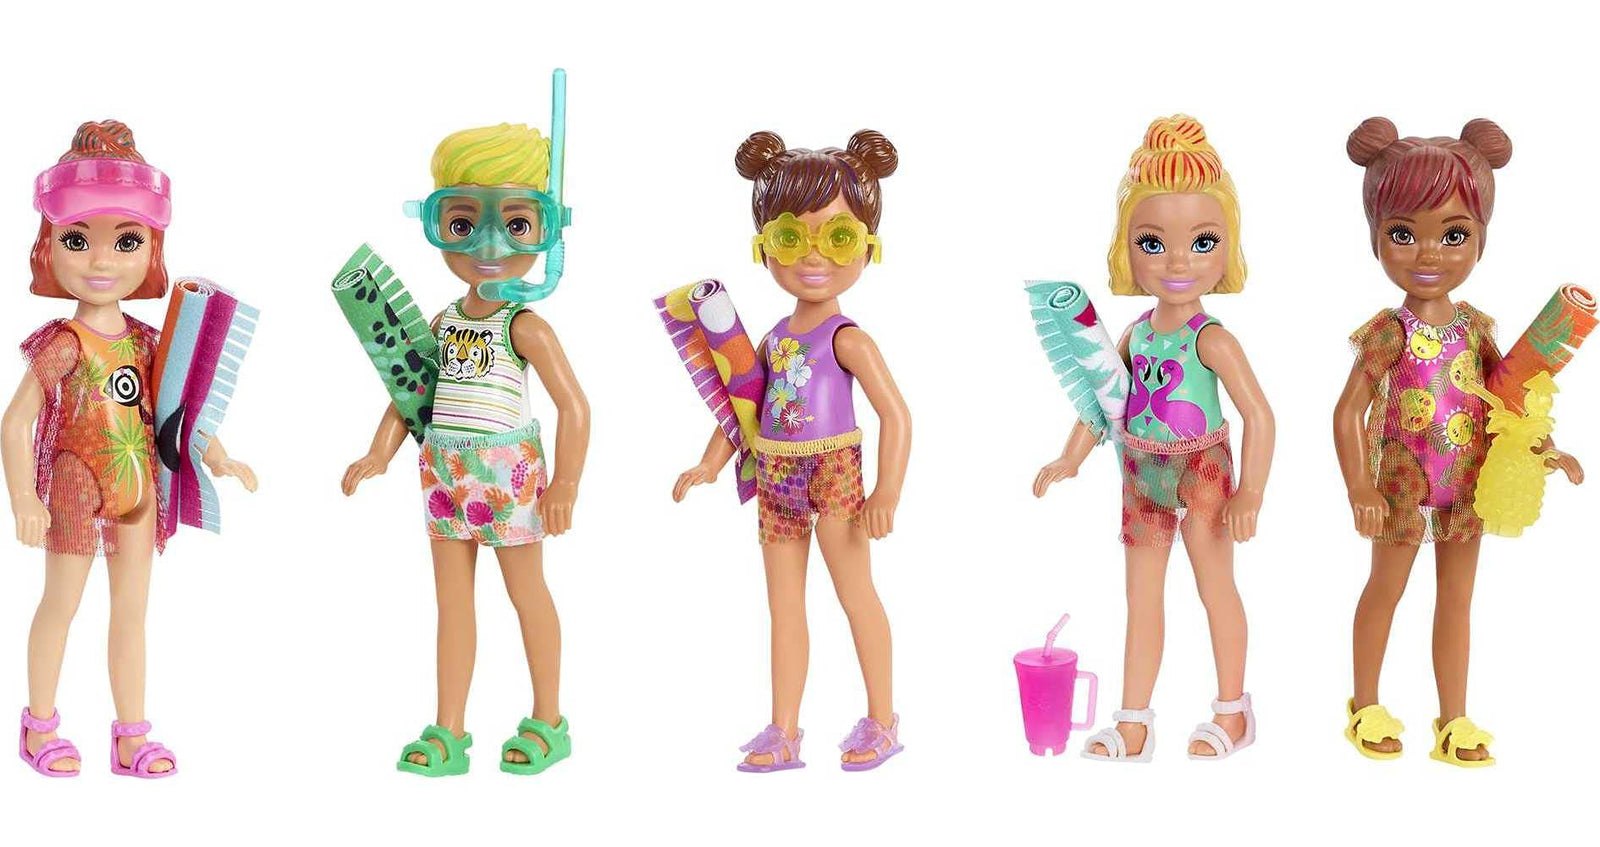 Barbie Chelsea Color Reveal Doll with 6 Surprises: 4 Bags with Cover-Up, Shoes, Towel & Accessory; Water Reveals Marble Blue Doll’s Look & Color Change on Hair; Sand & Sun Series